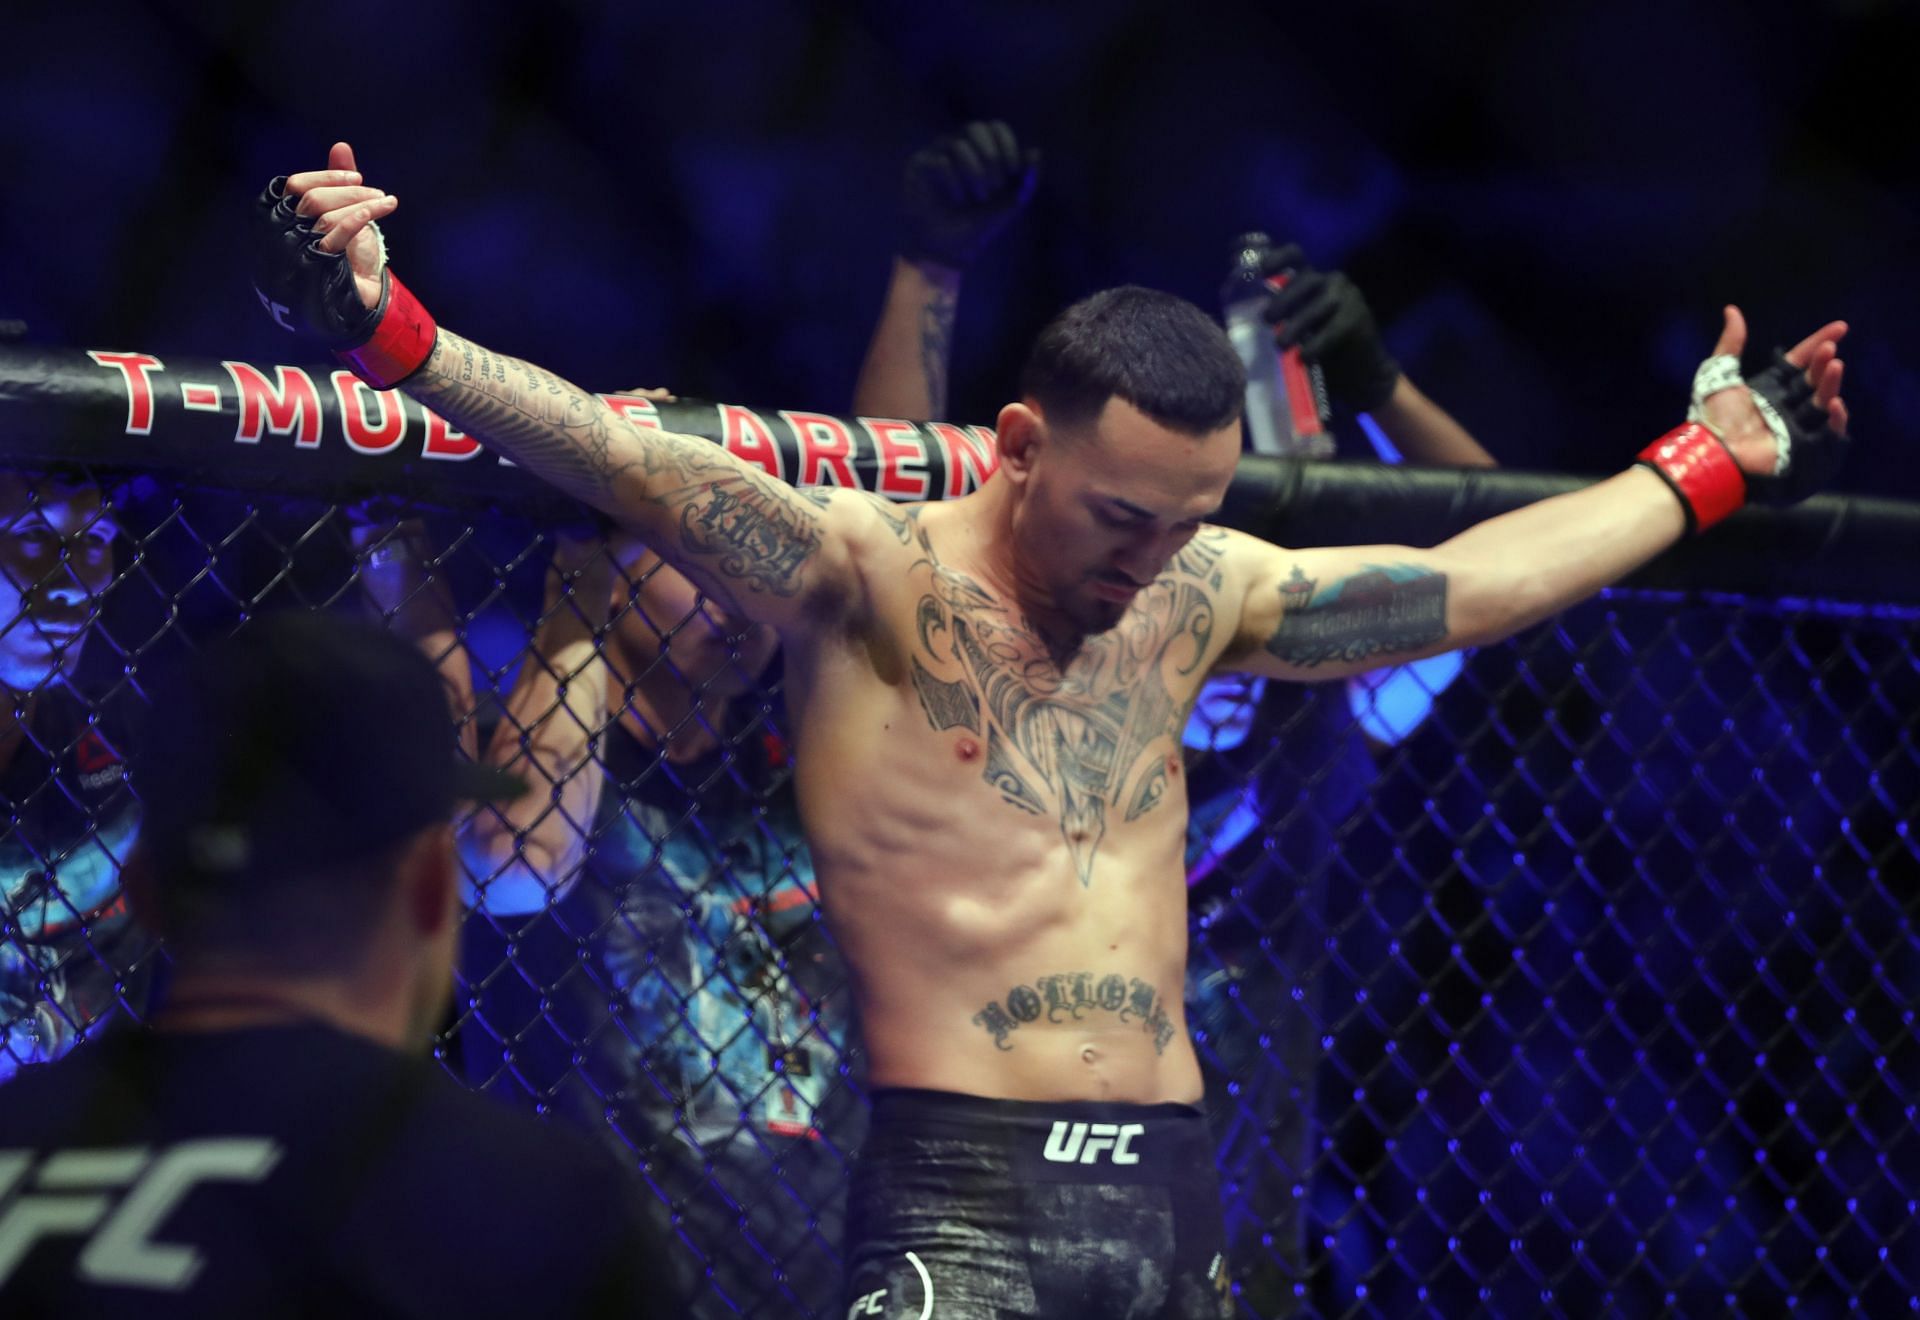 Max Holloway&#039;s octagon debut saw him easily defeated by Dustin Poirier